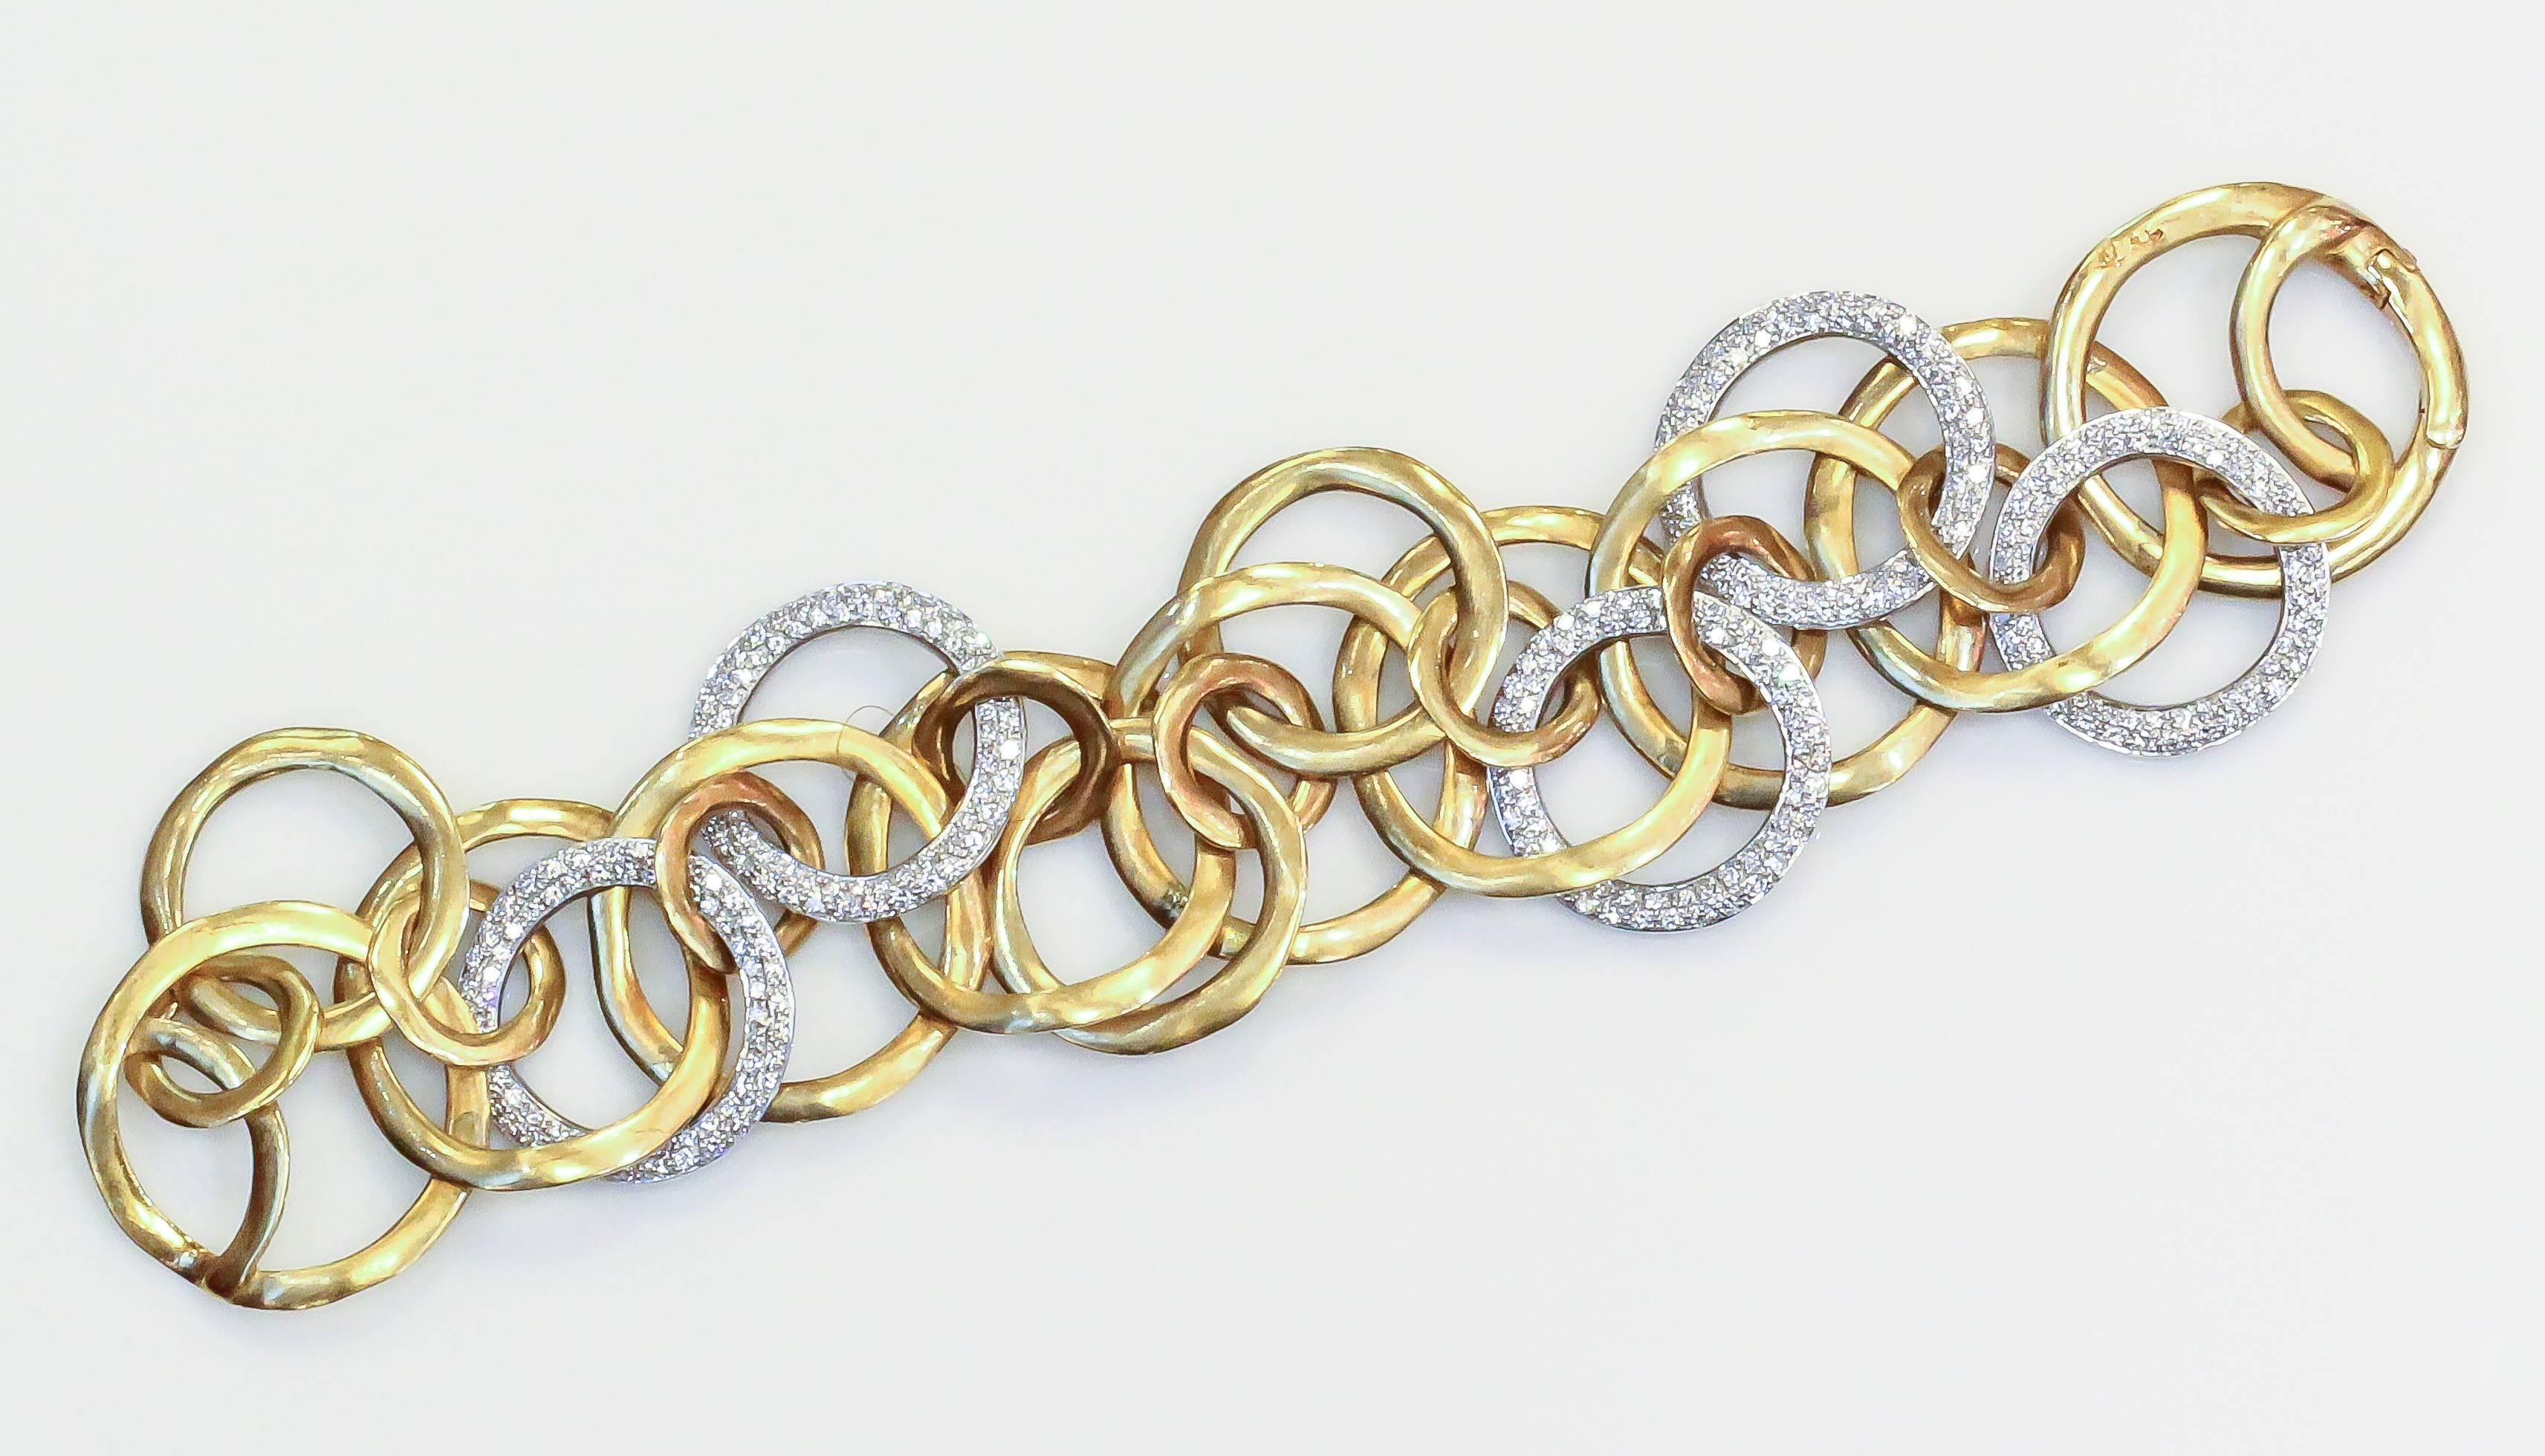 Whimsical diamond and 18K yellow gold link bracelet from the "Piatta" collection by Pomellato. It features high grade round brilliant cut diamonds, approx. 4.0cts total weight. Beautifully to wear and excellent workmanship. With paperwork